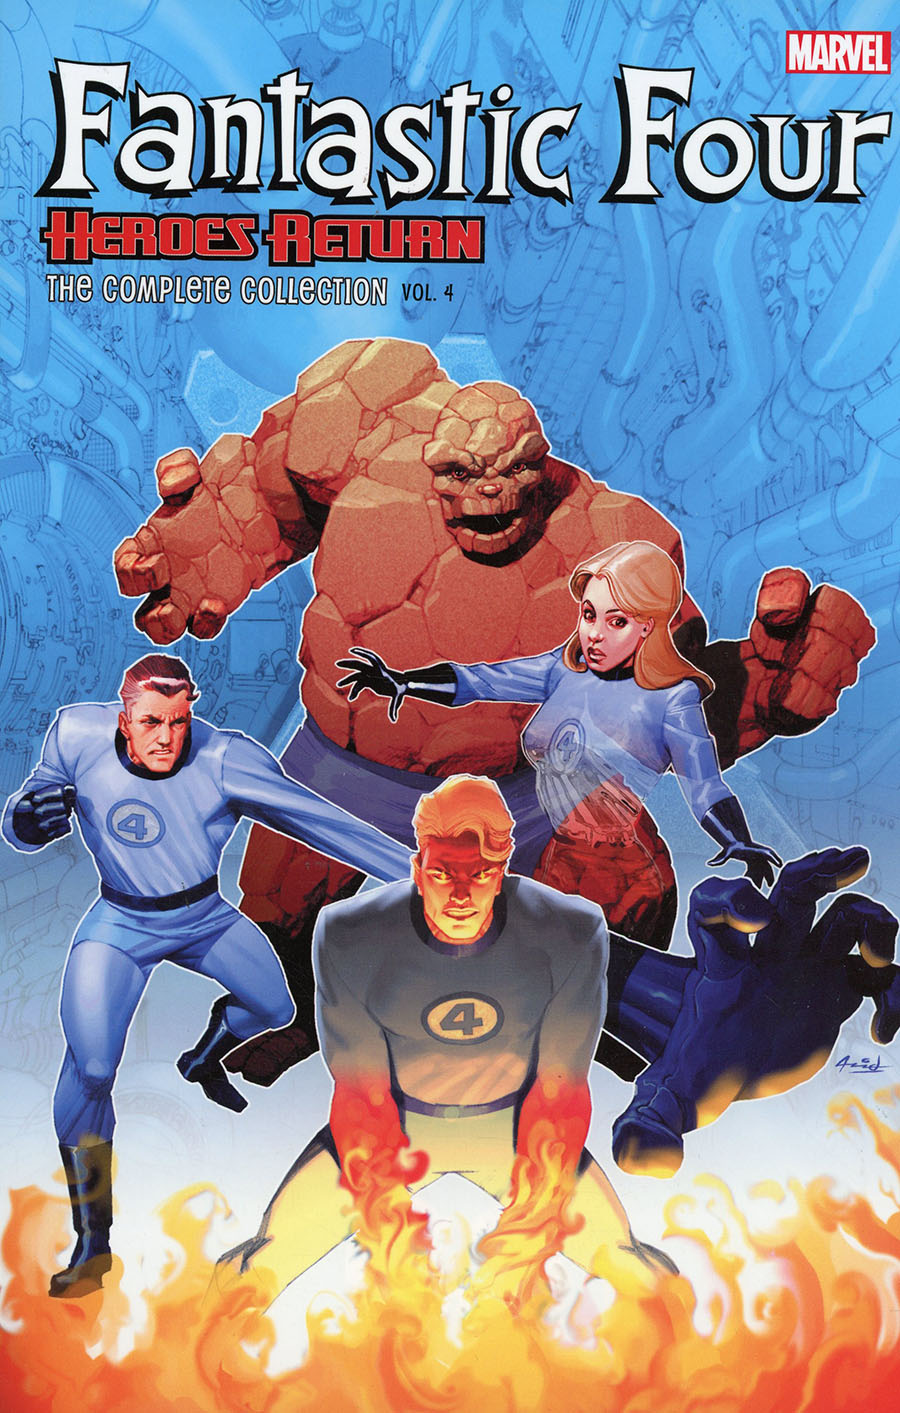 Fantastic Four Heroes Return Complete Collection Vol 4 TP